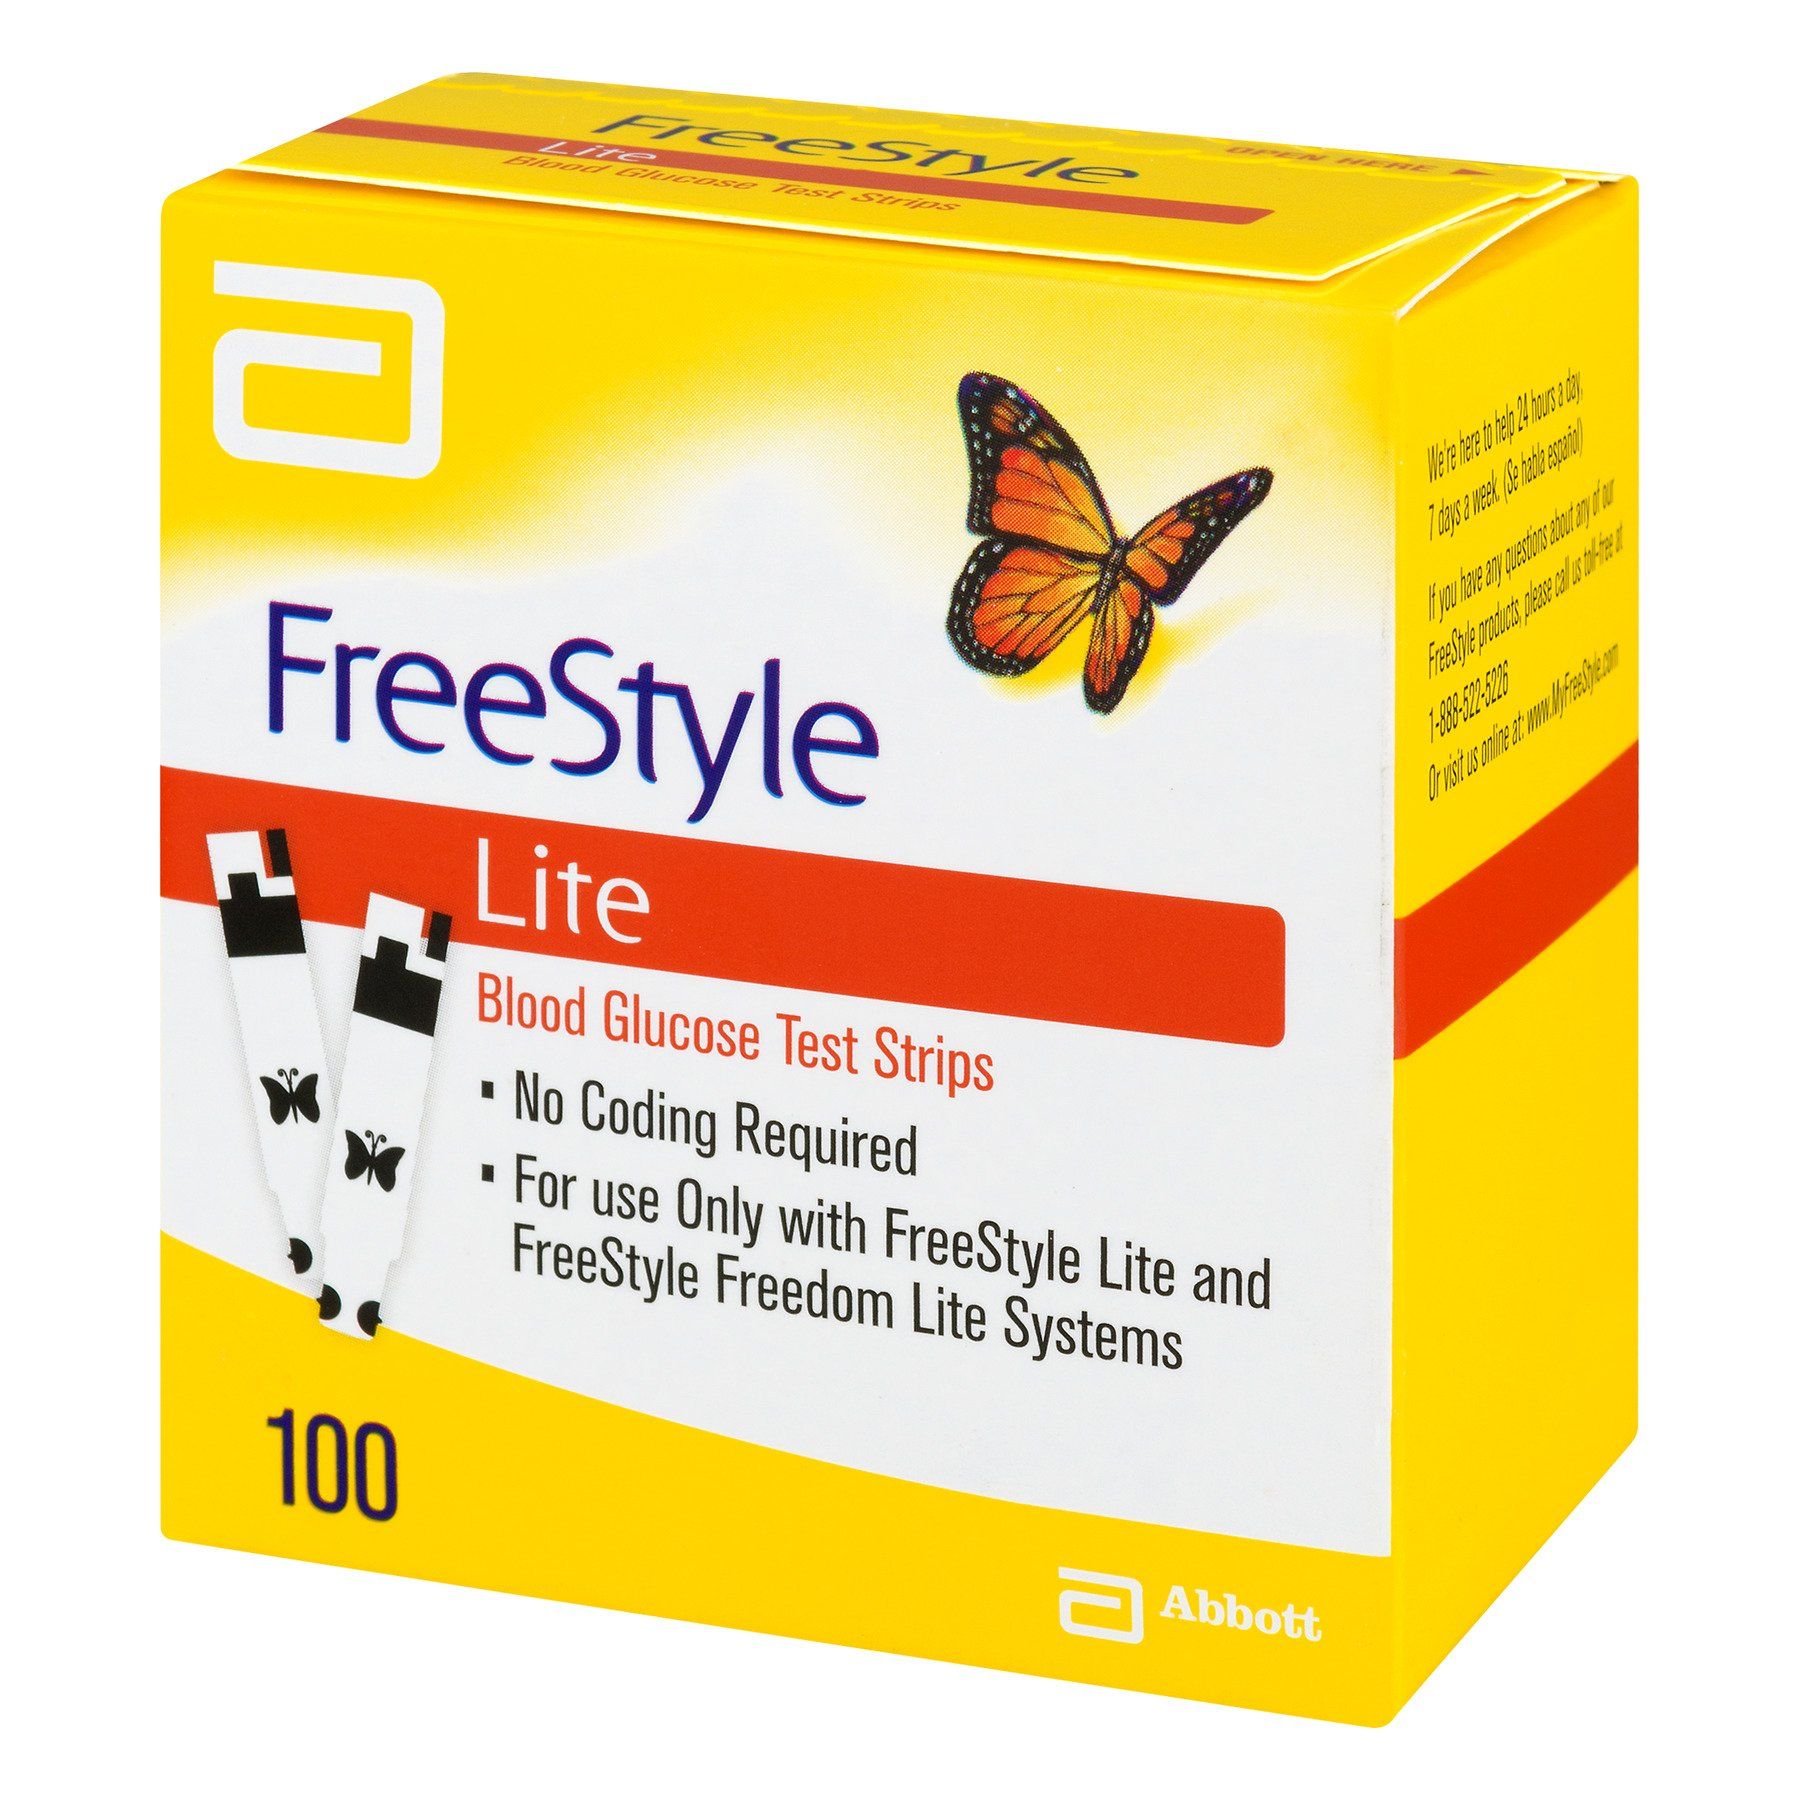 Freestyle style ligt testing strips